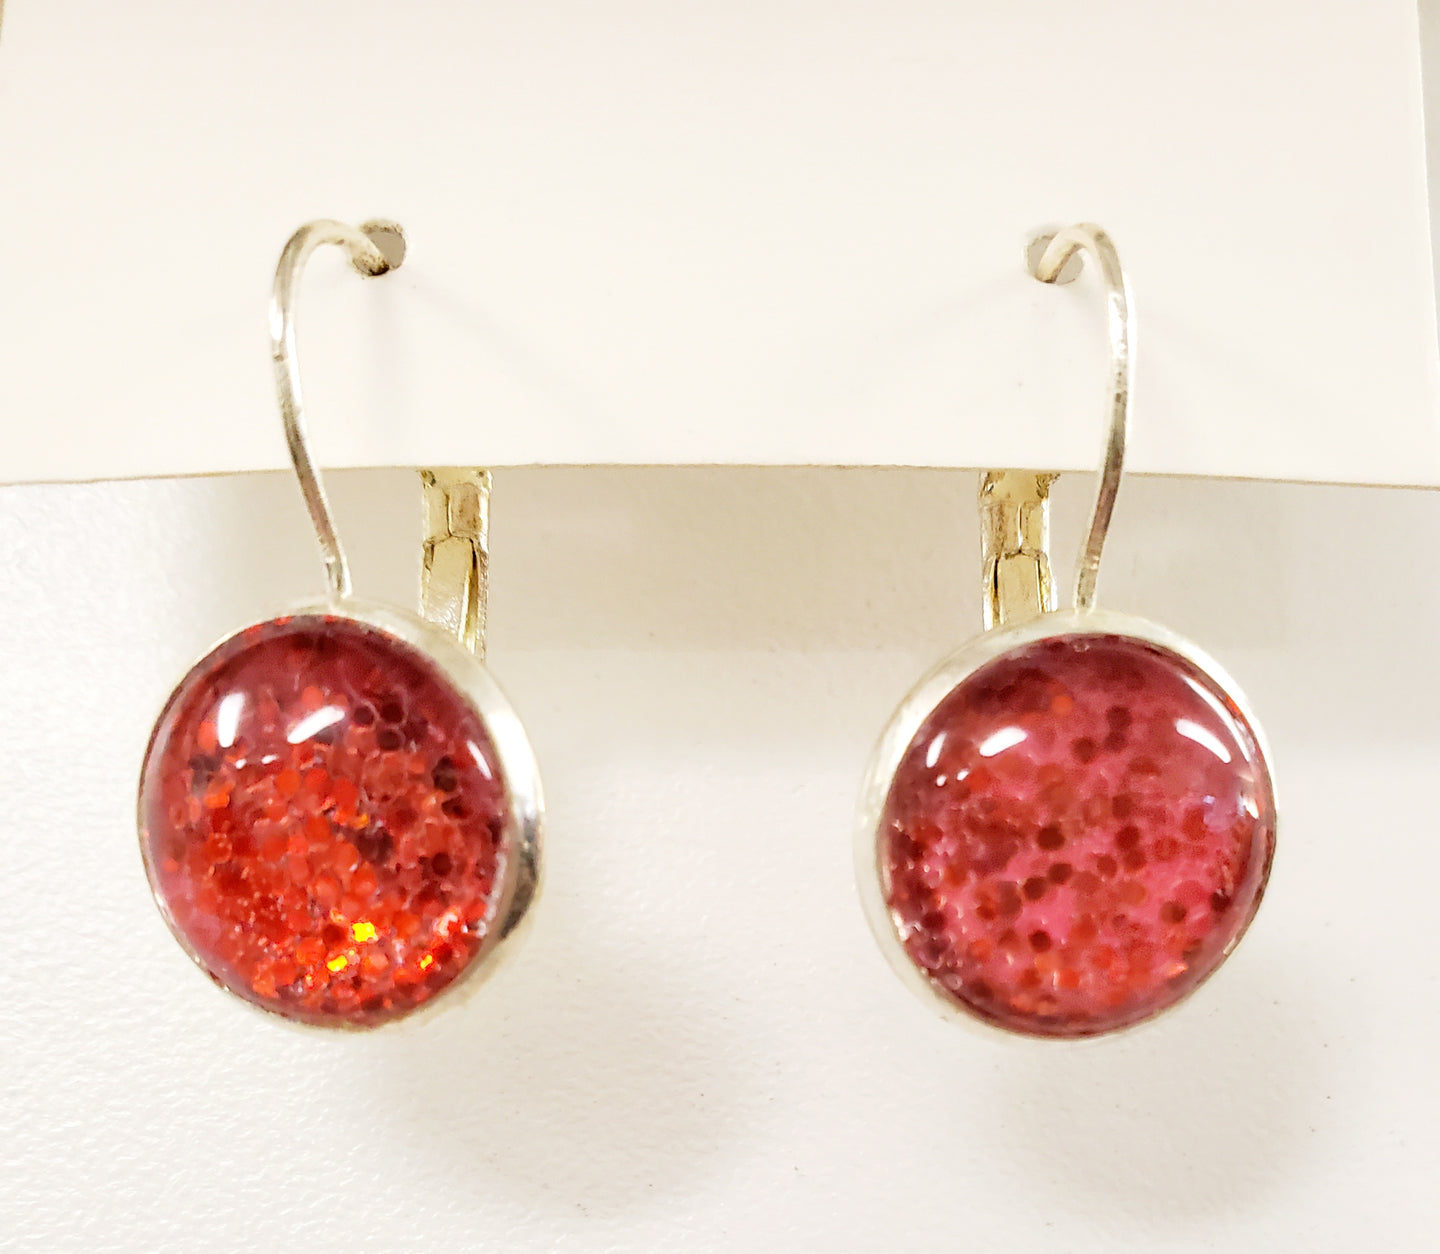 Red Sparkle Earrings